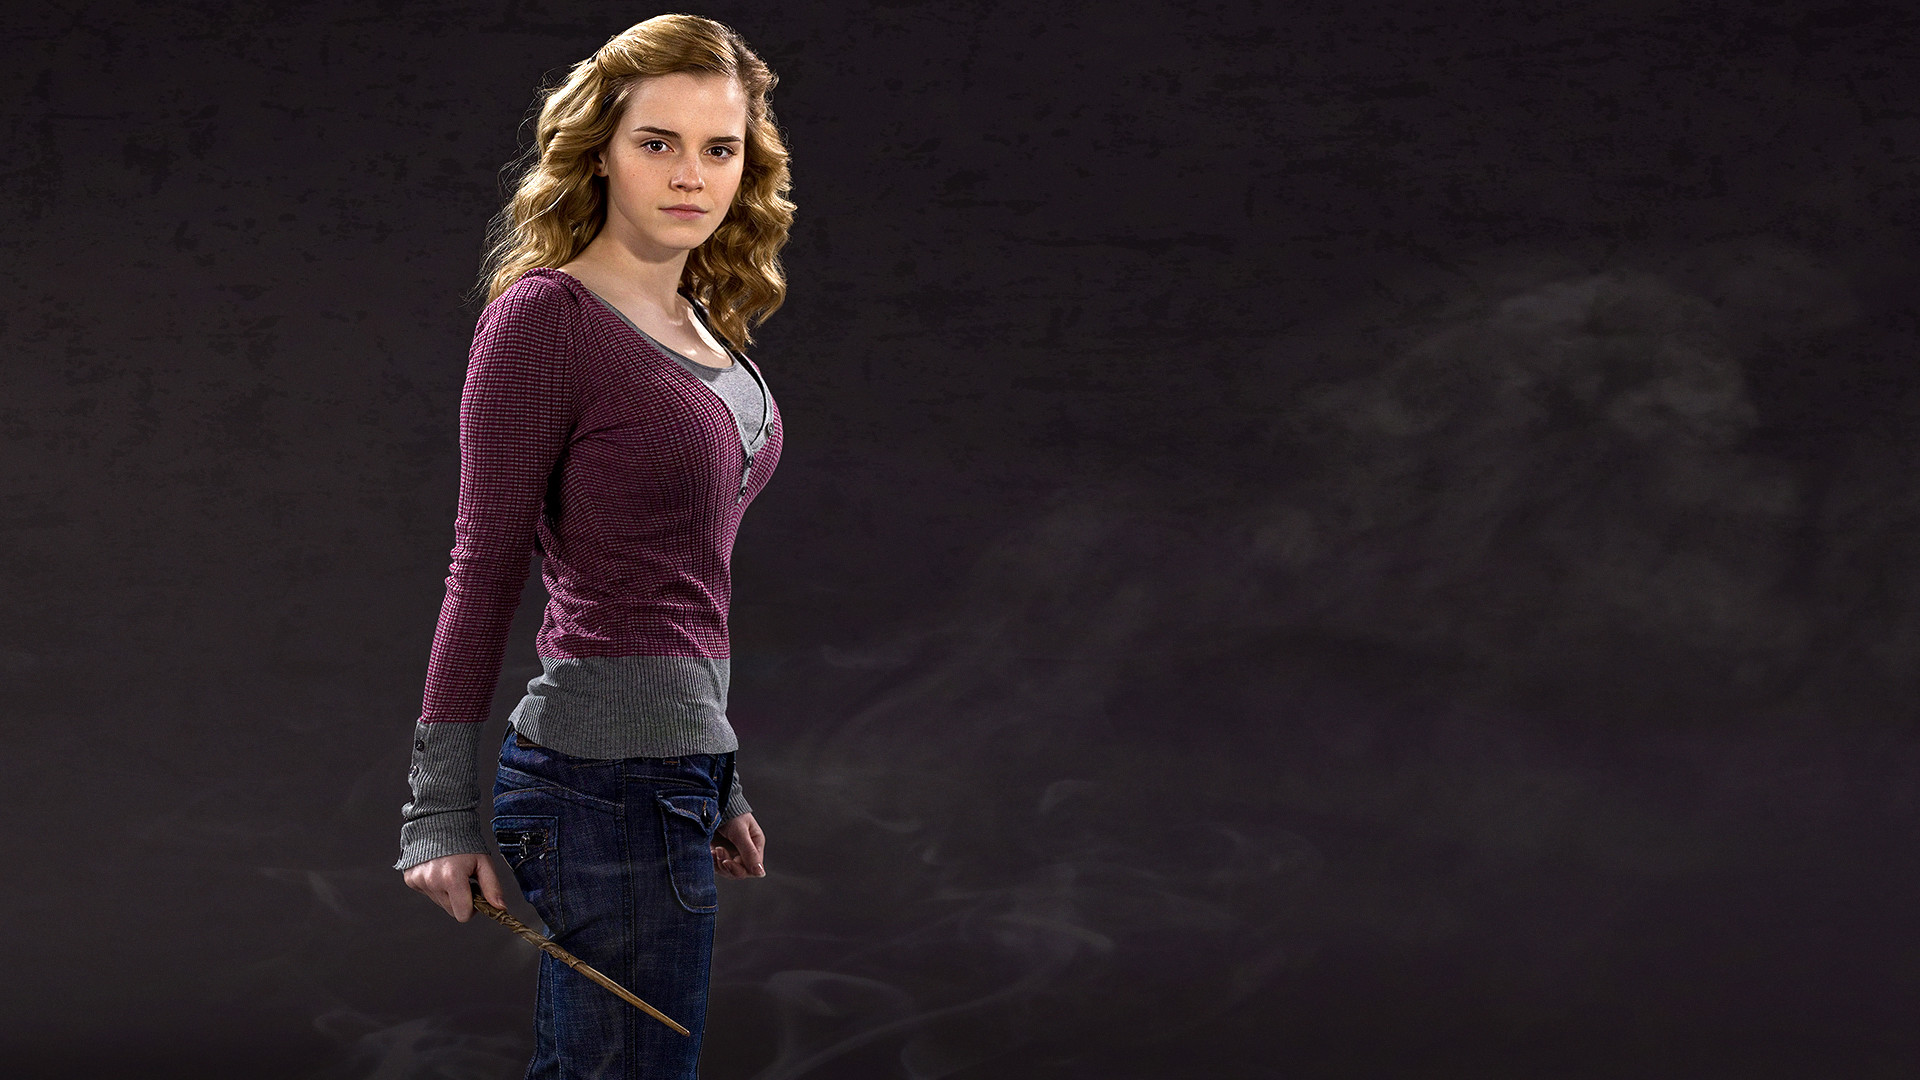 1920x1080 Emma Watson Wide Full HD 1080p Images Photos Pics Wallpapers  startwallpapers. Â«Â«